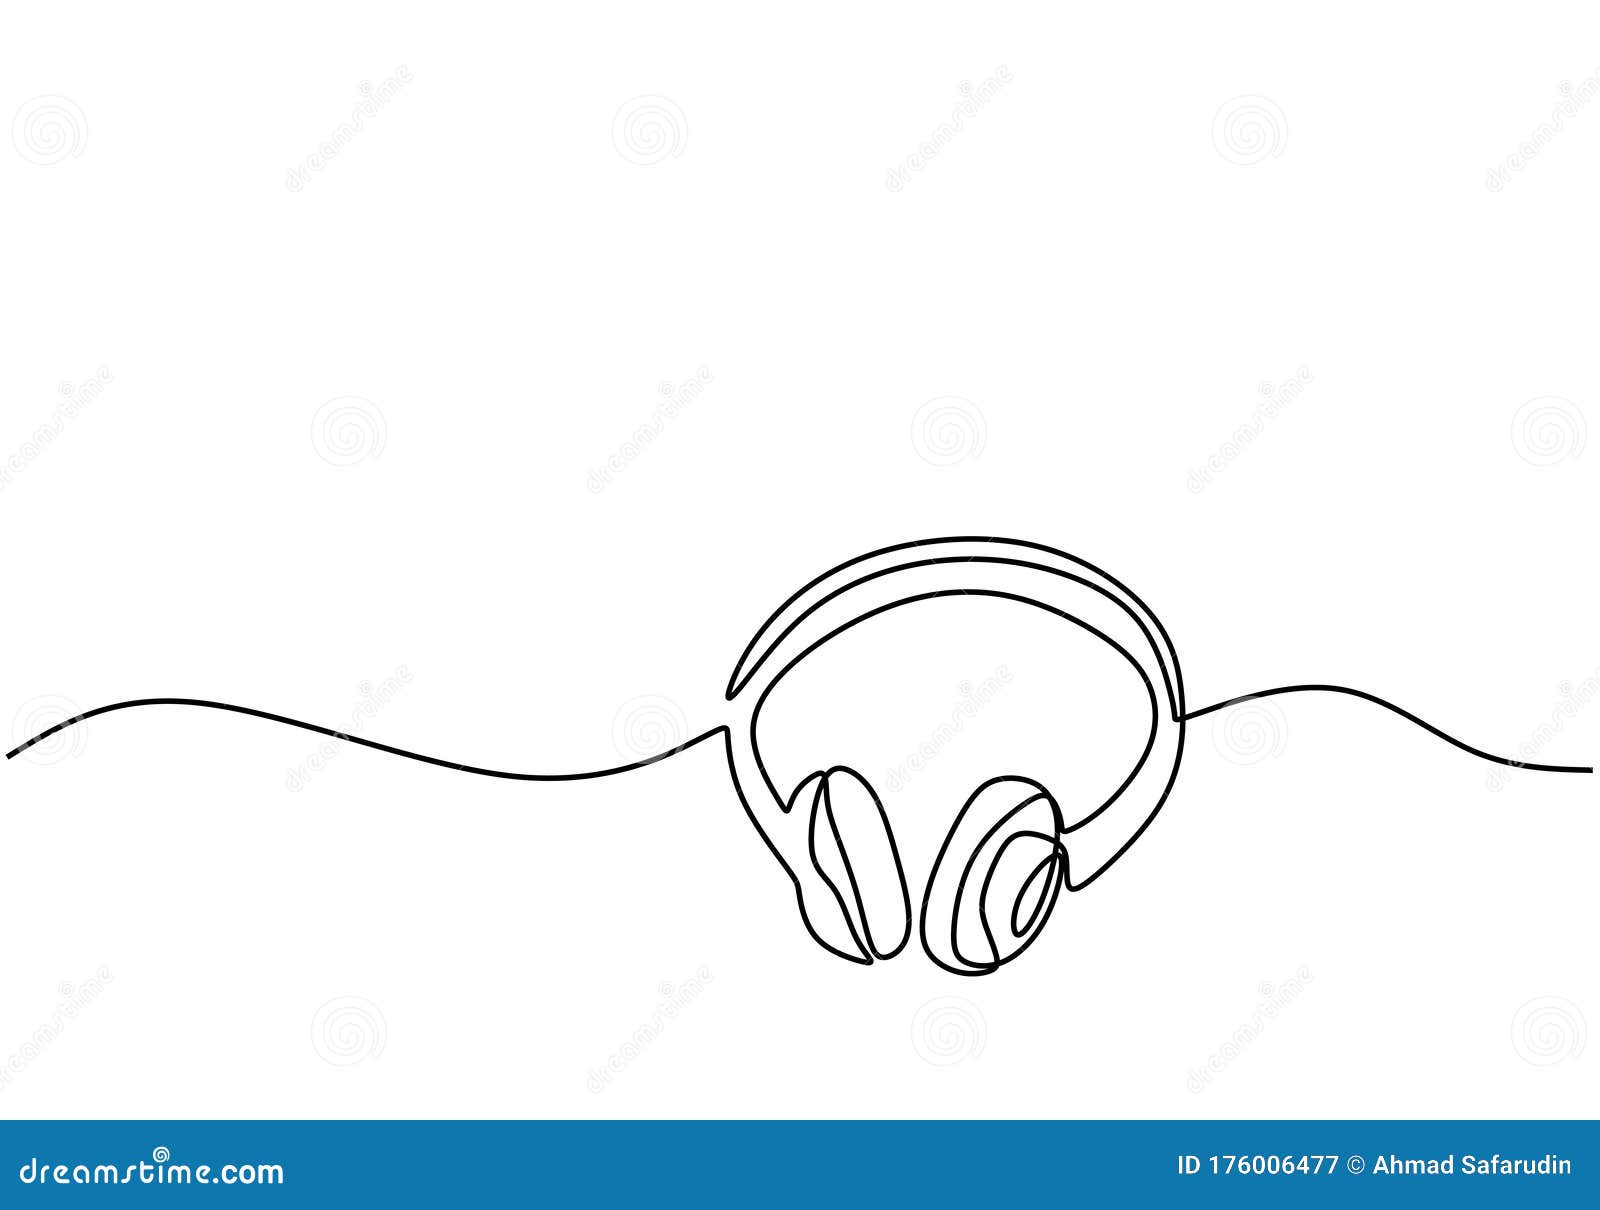 one line drawing of headphone speaker, device gadget continuous hand drawn contour ,  on white background. music